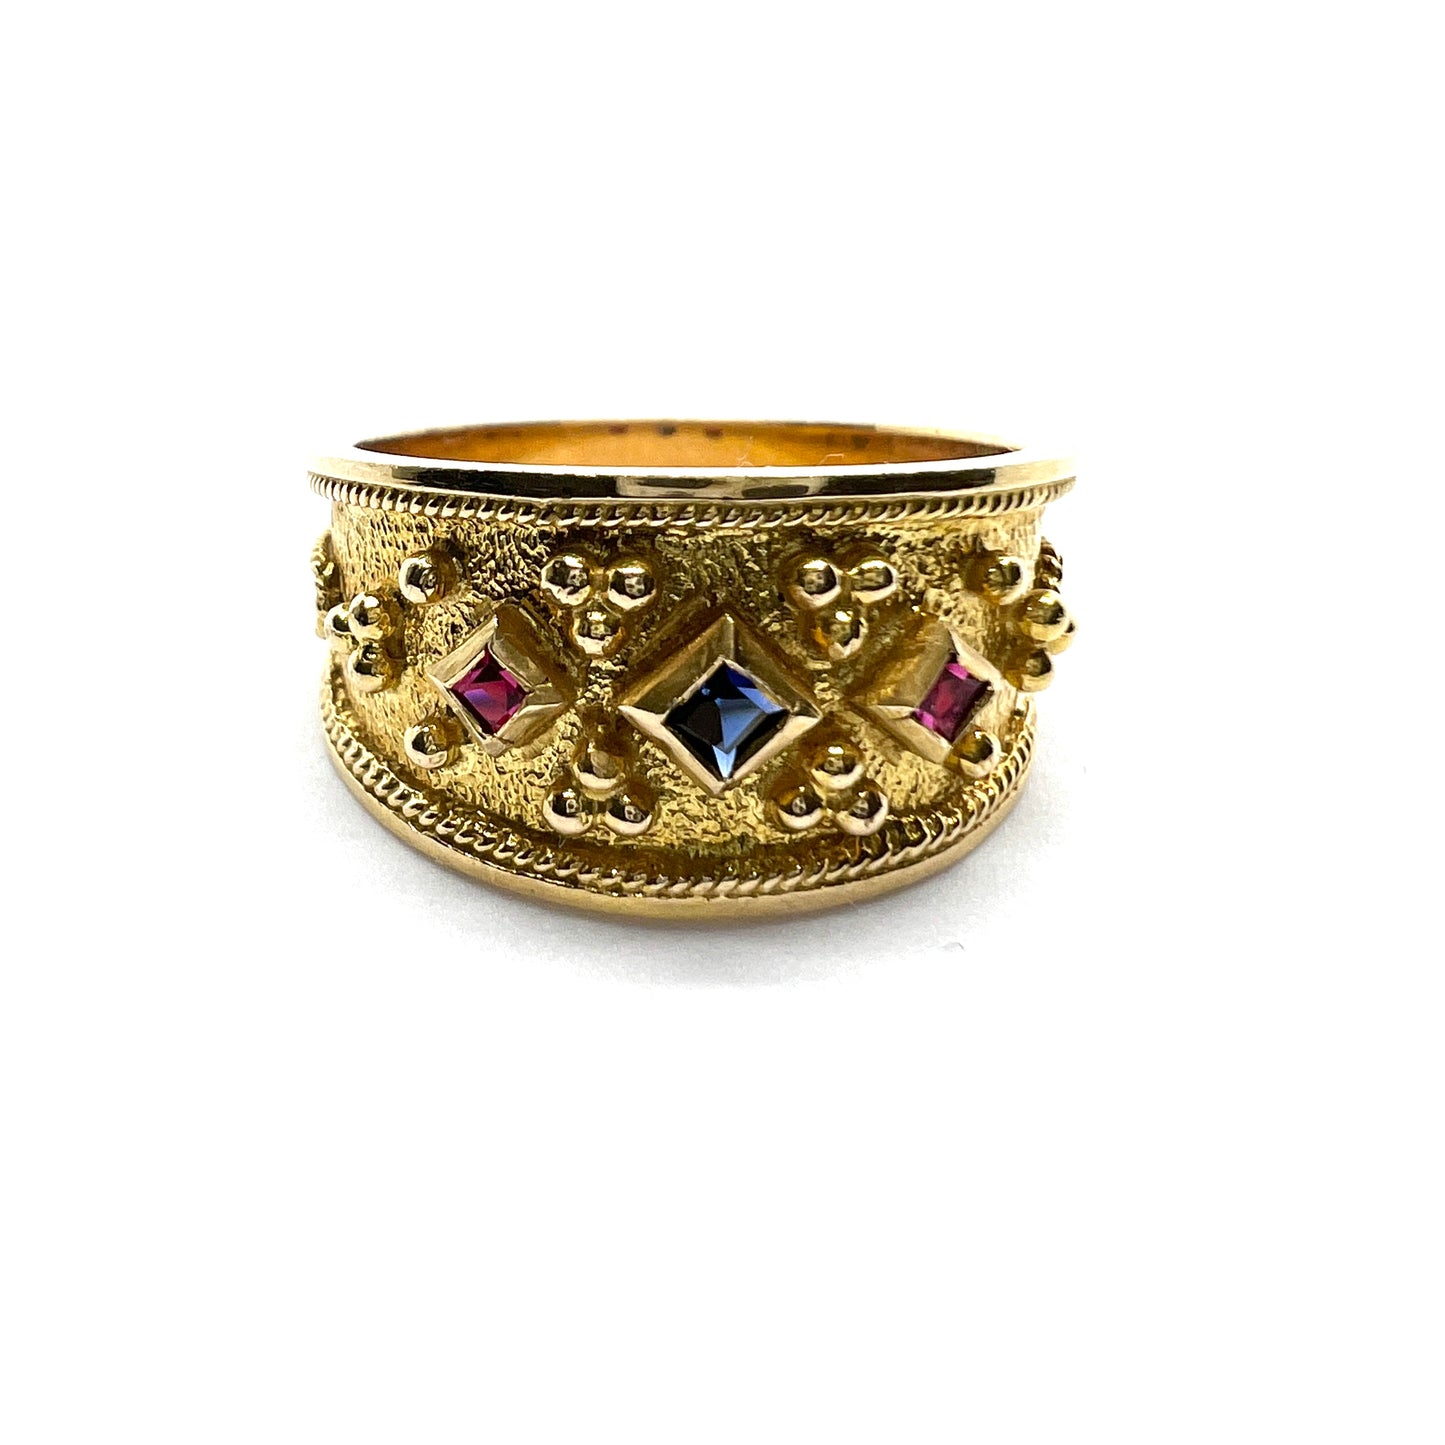 Vintage 14k Gold Synthetic Sapphire Etruscan Revival Ring.